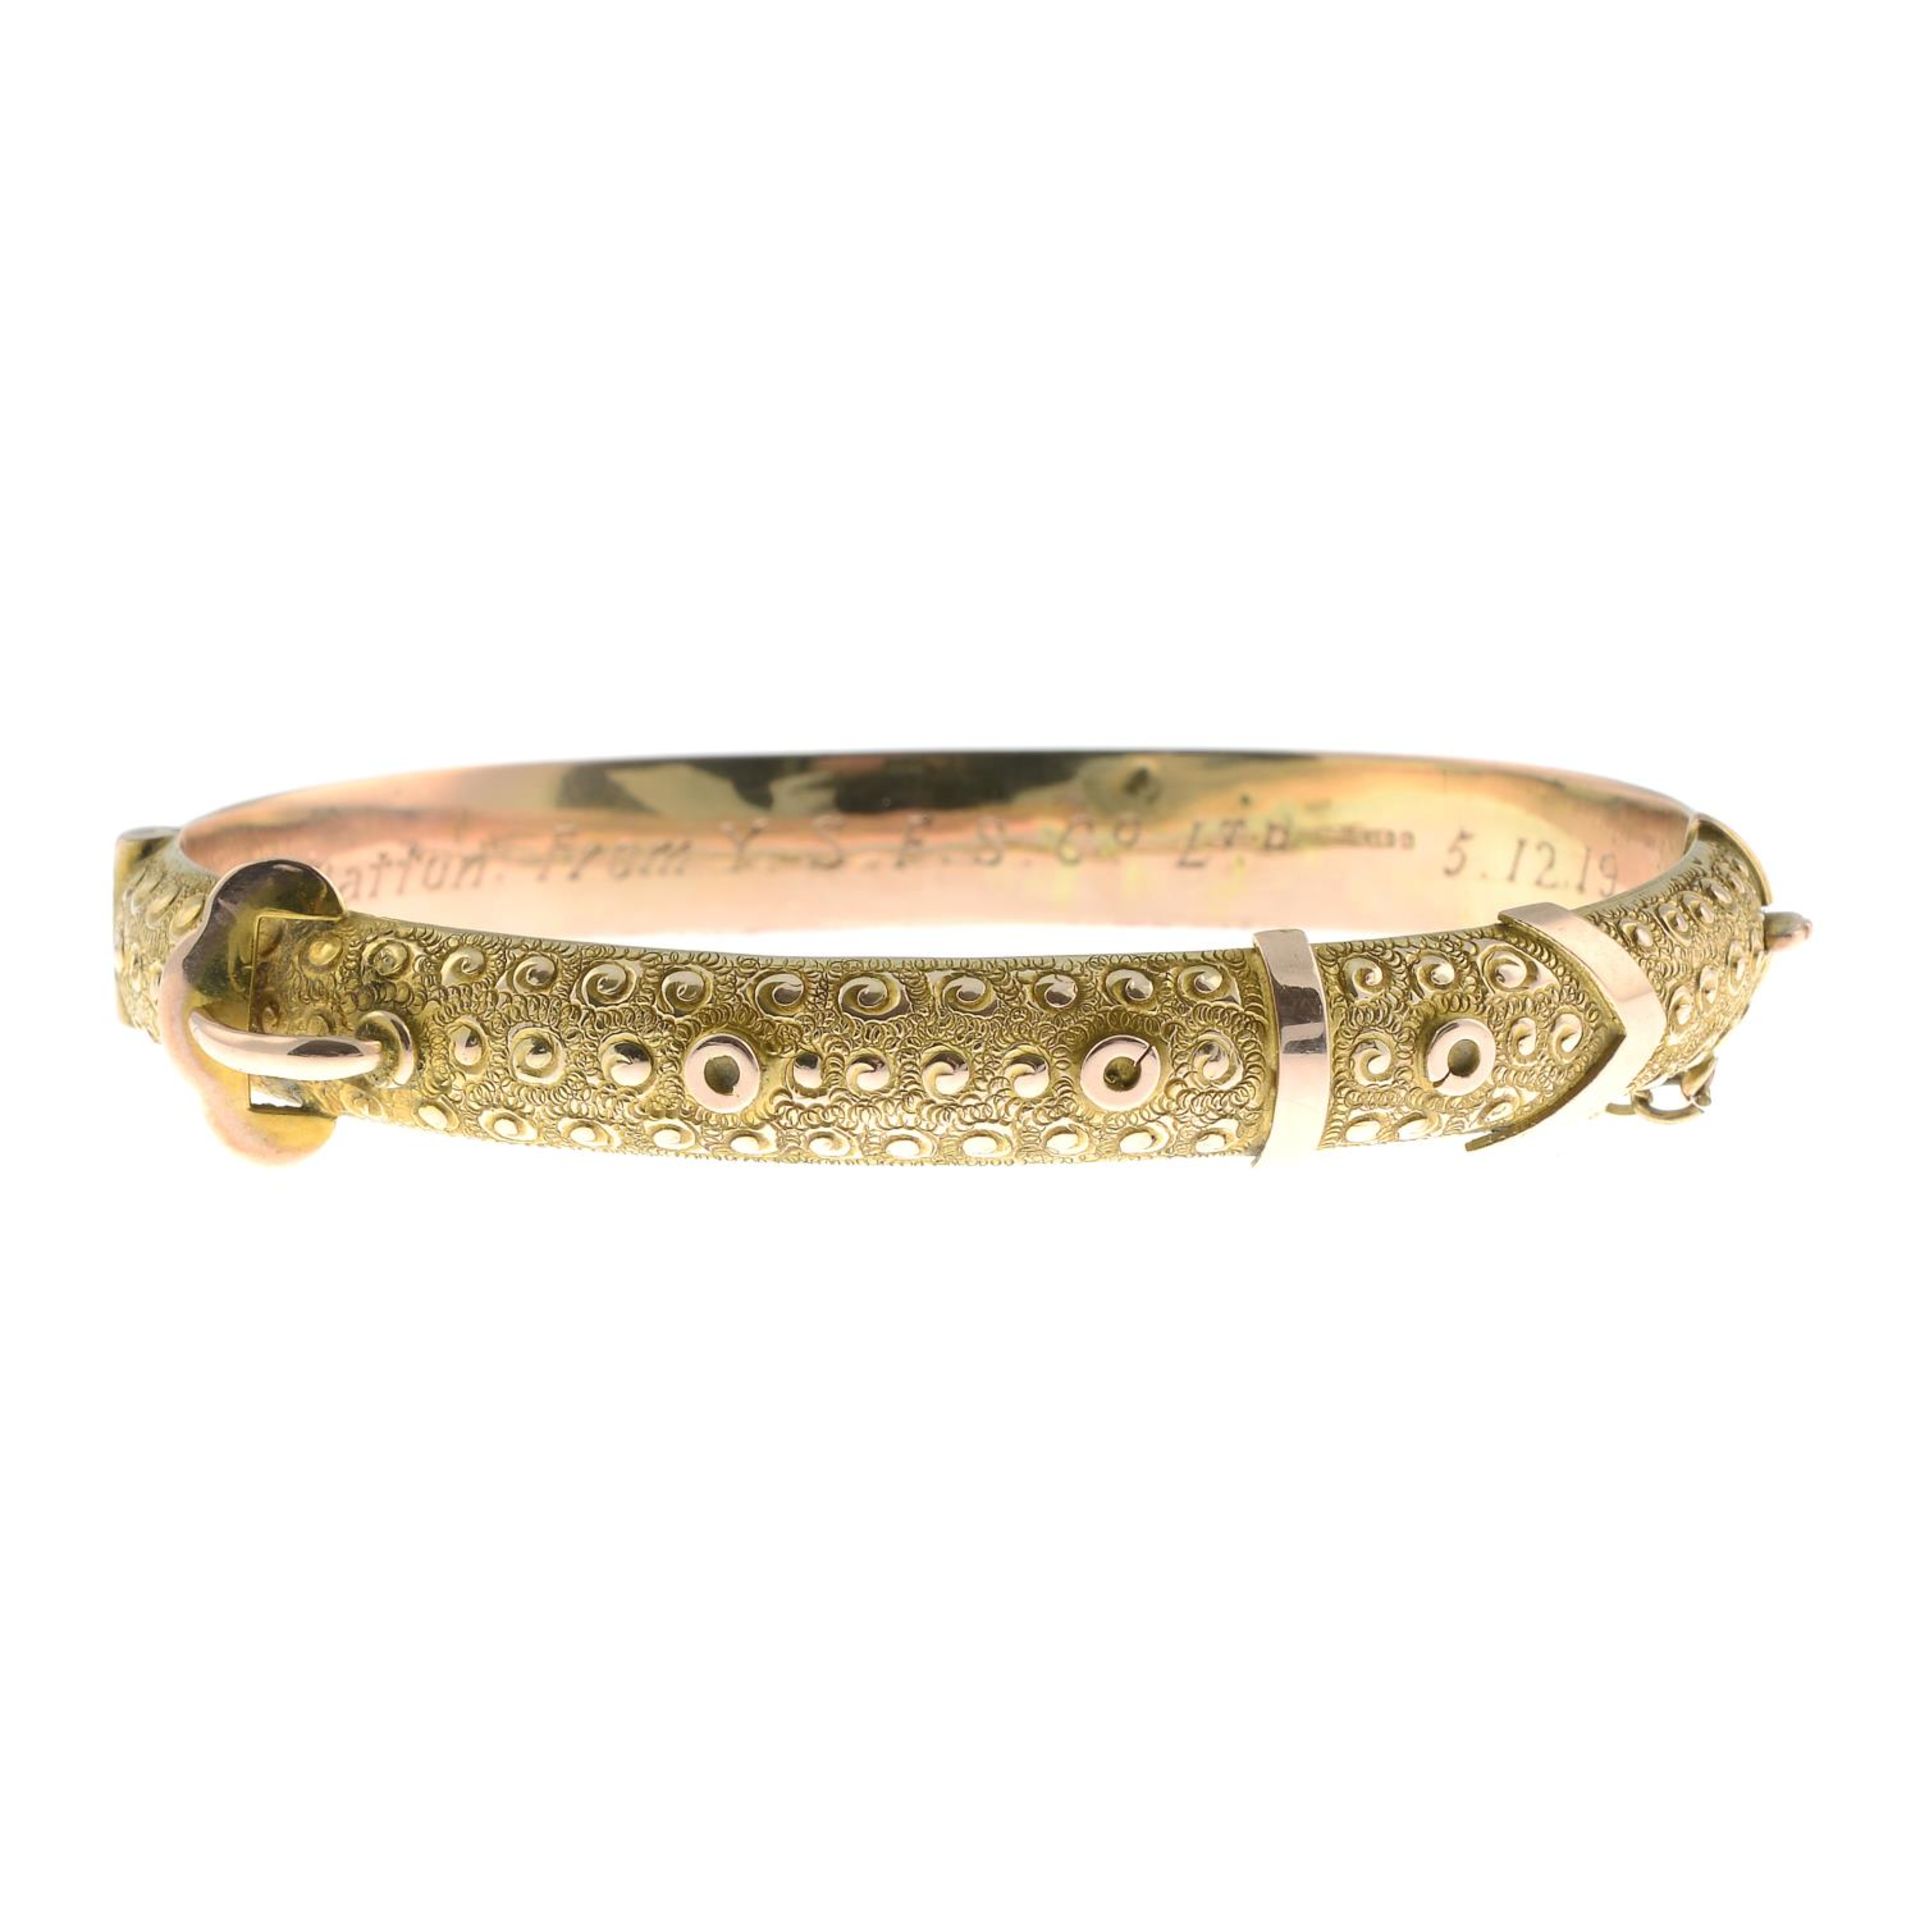 An early 20th century 9ct gold hinged bangle,